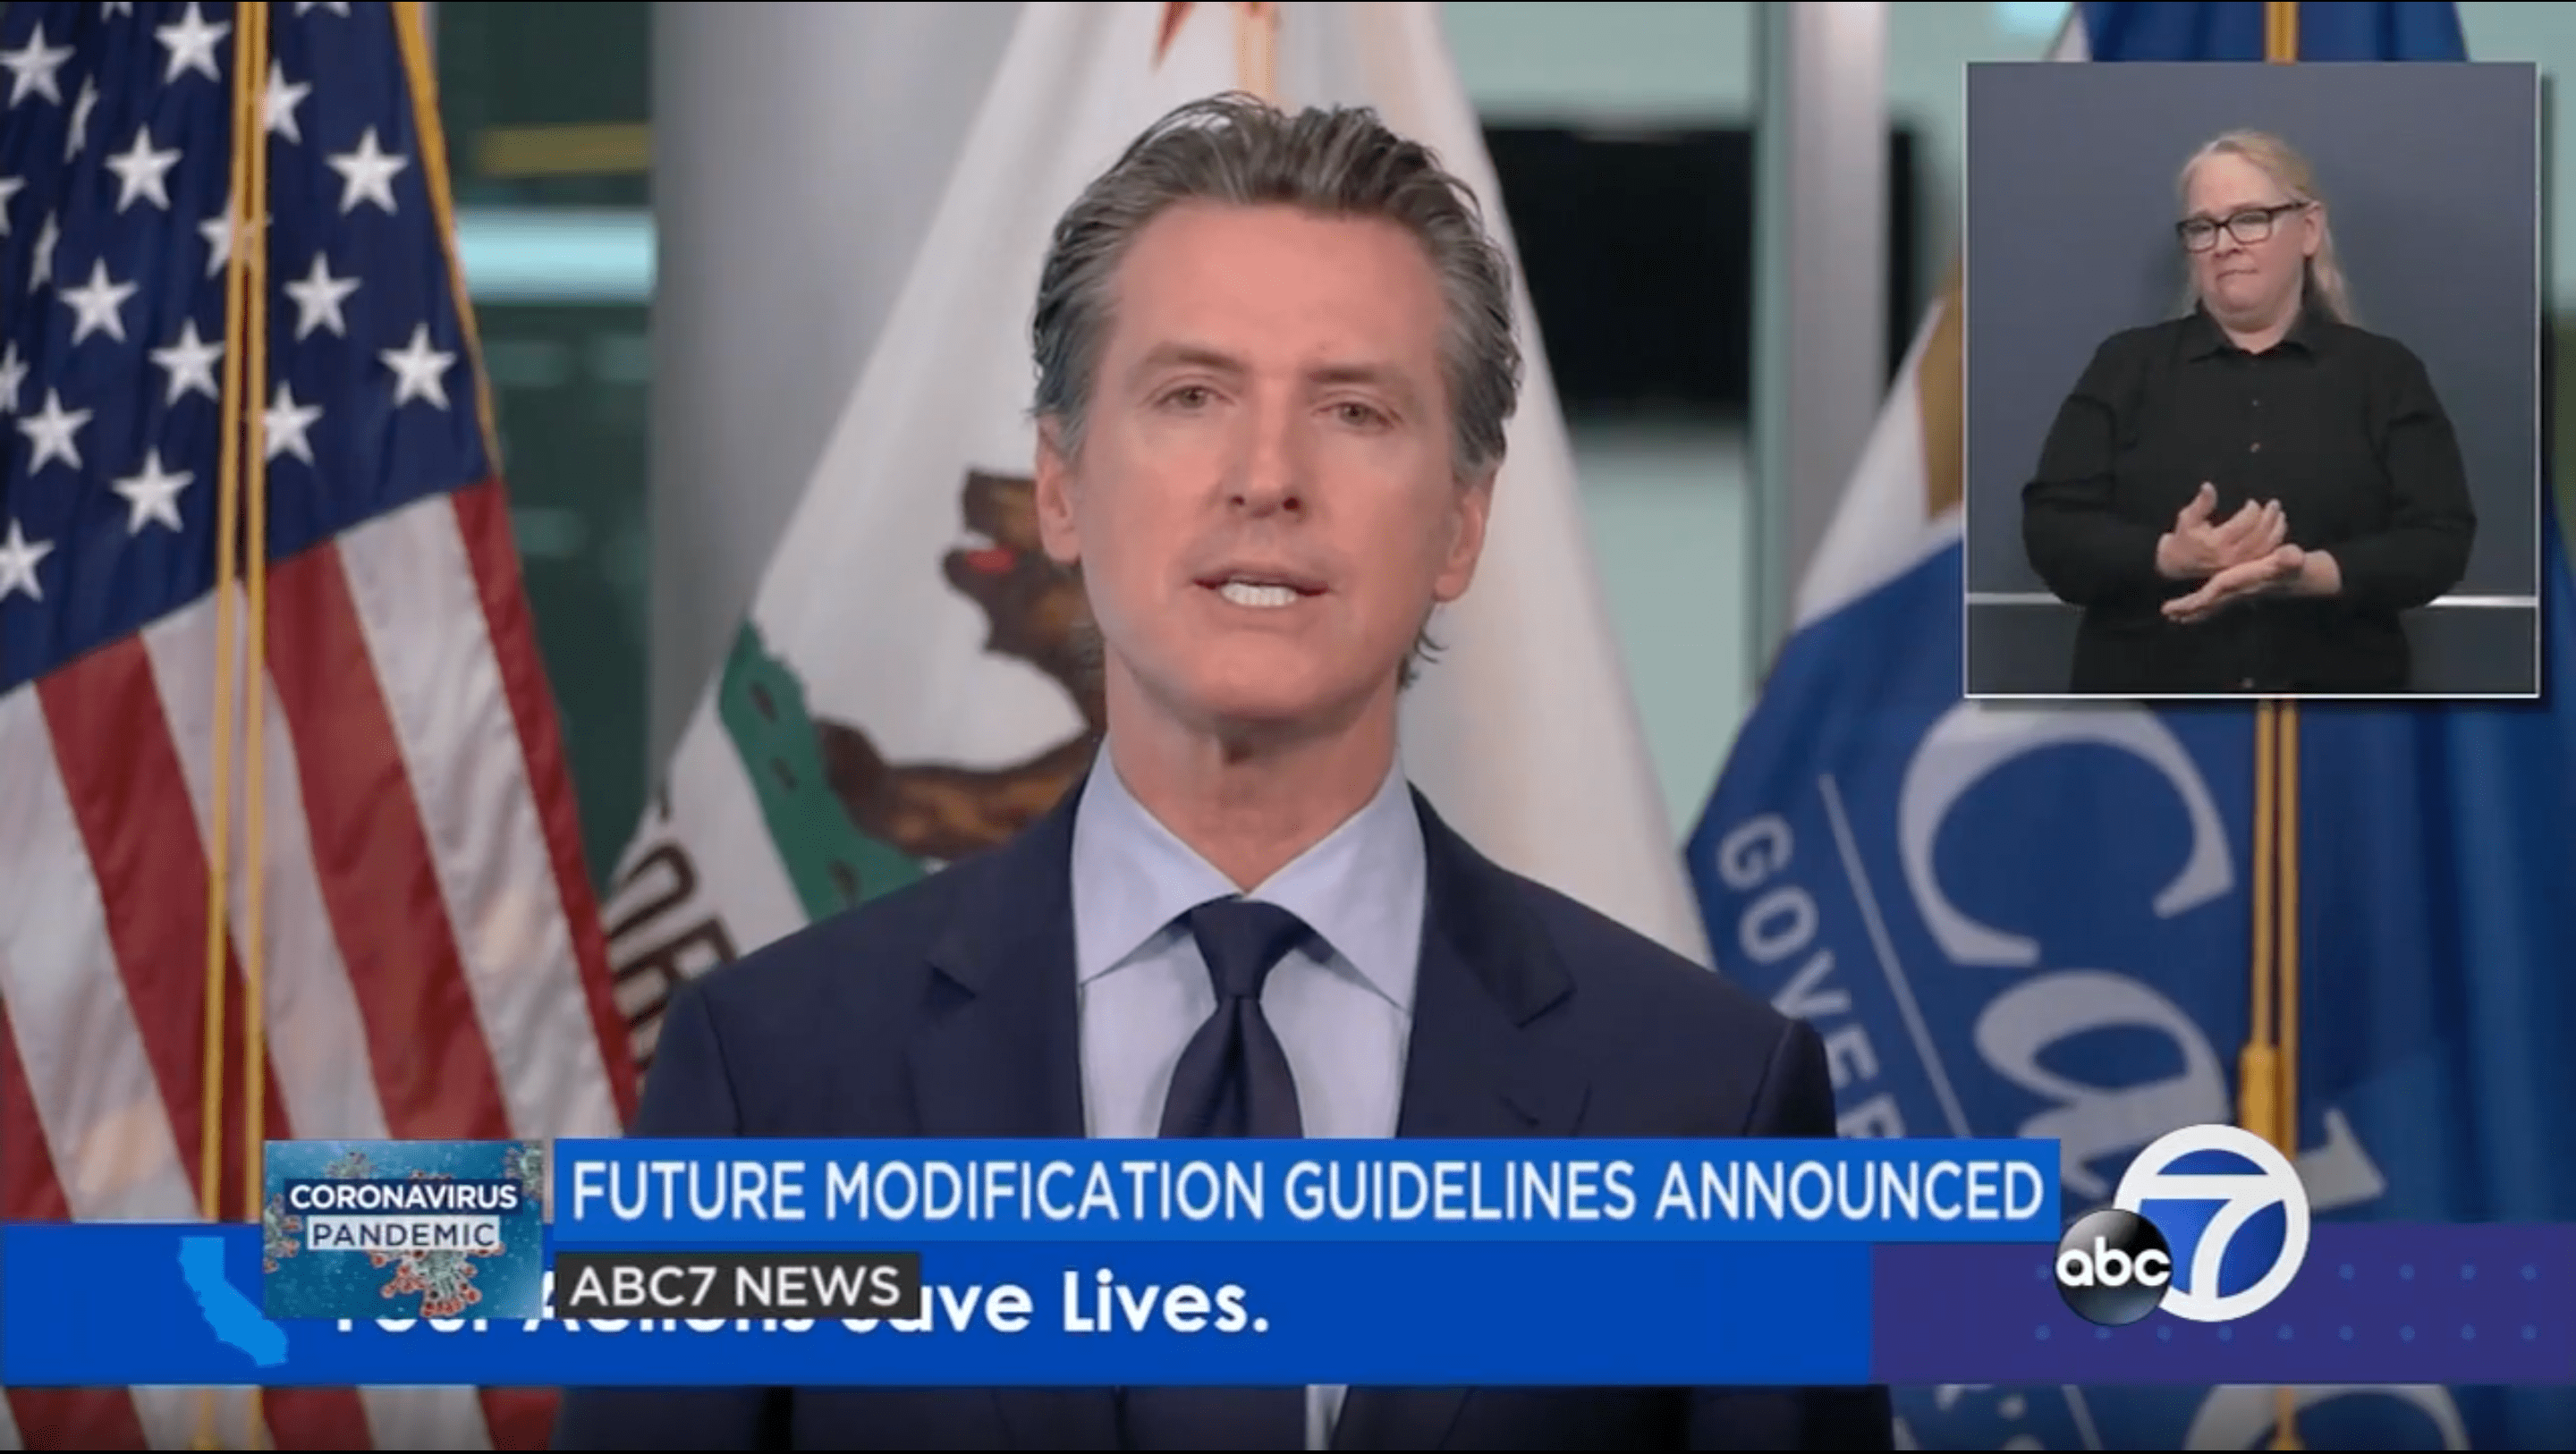 Reopening California: Newsom gives guidelines to reopen dine-in restaurants, malls, offices and more in CA